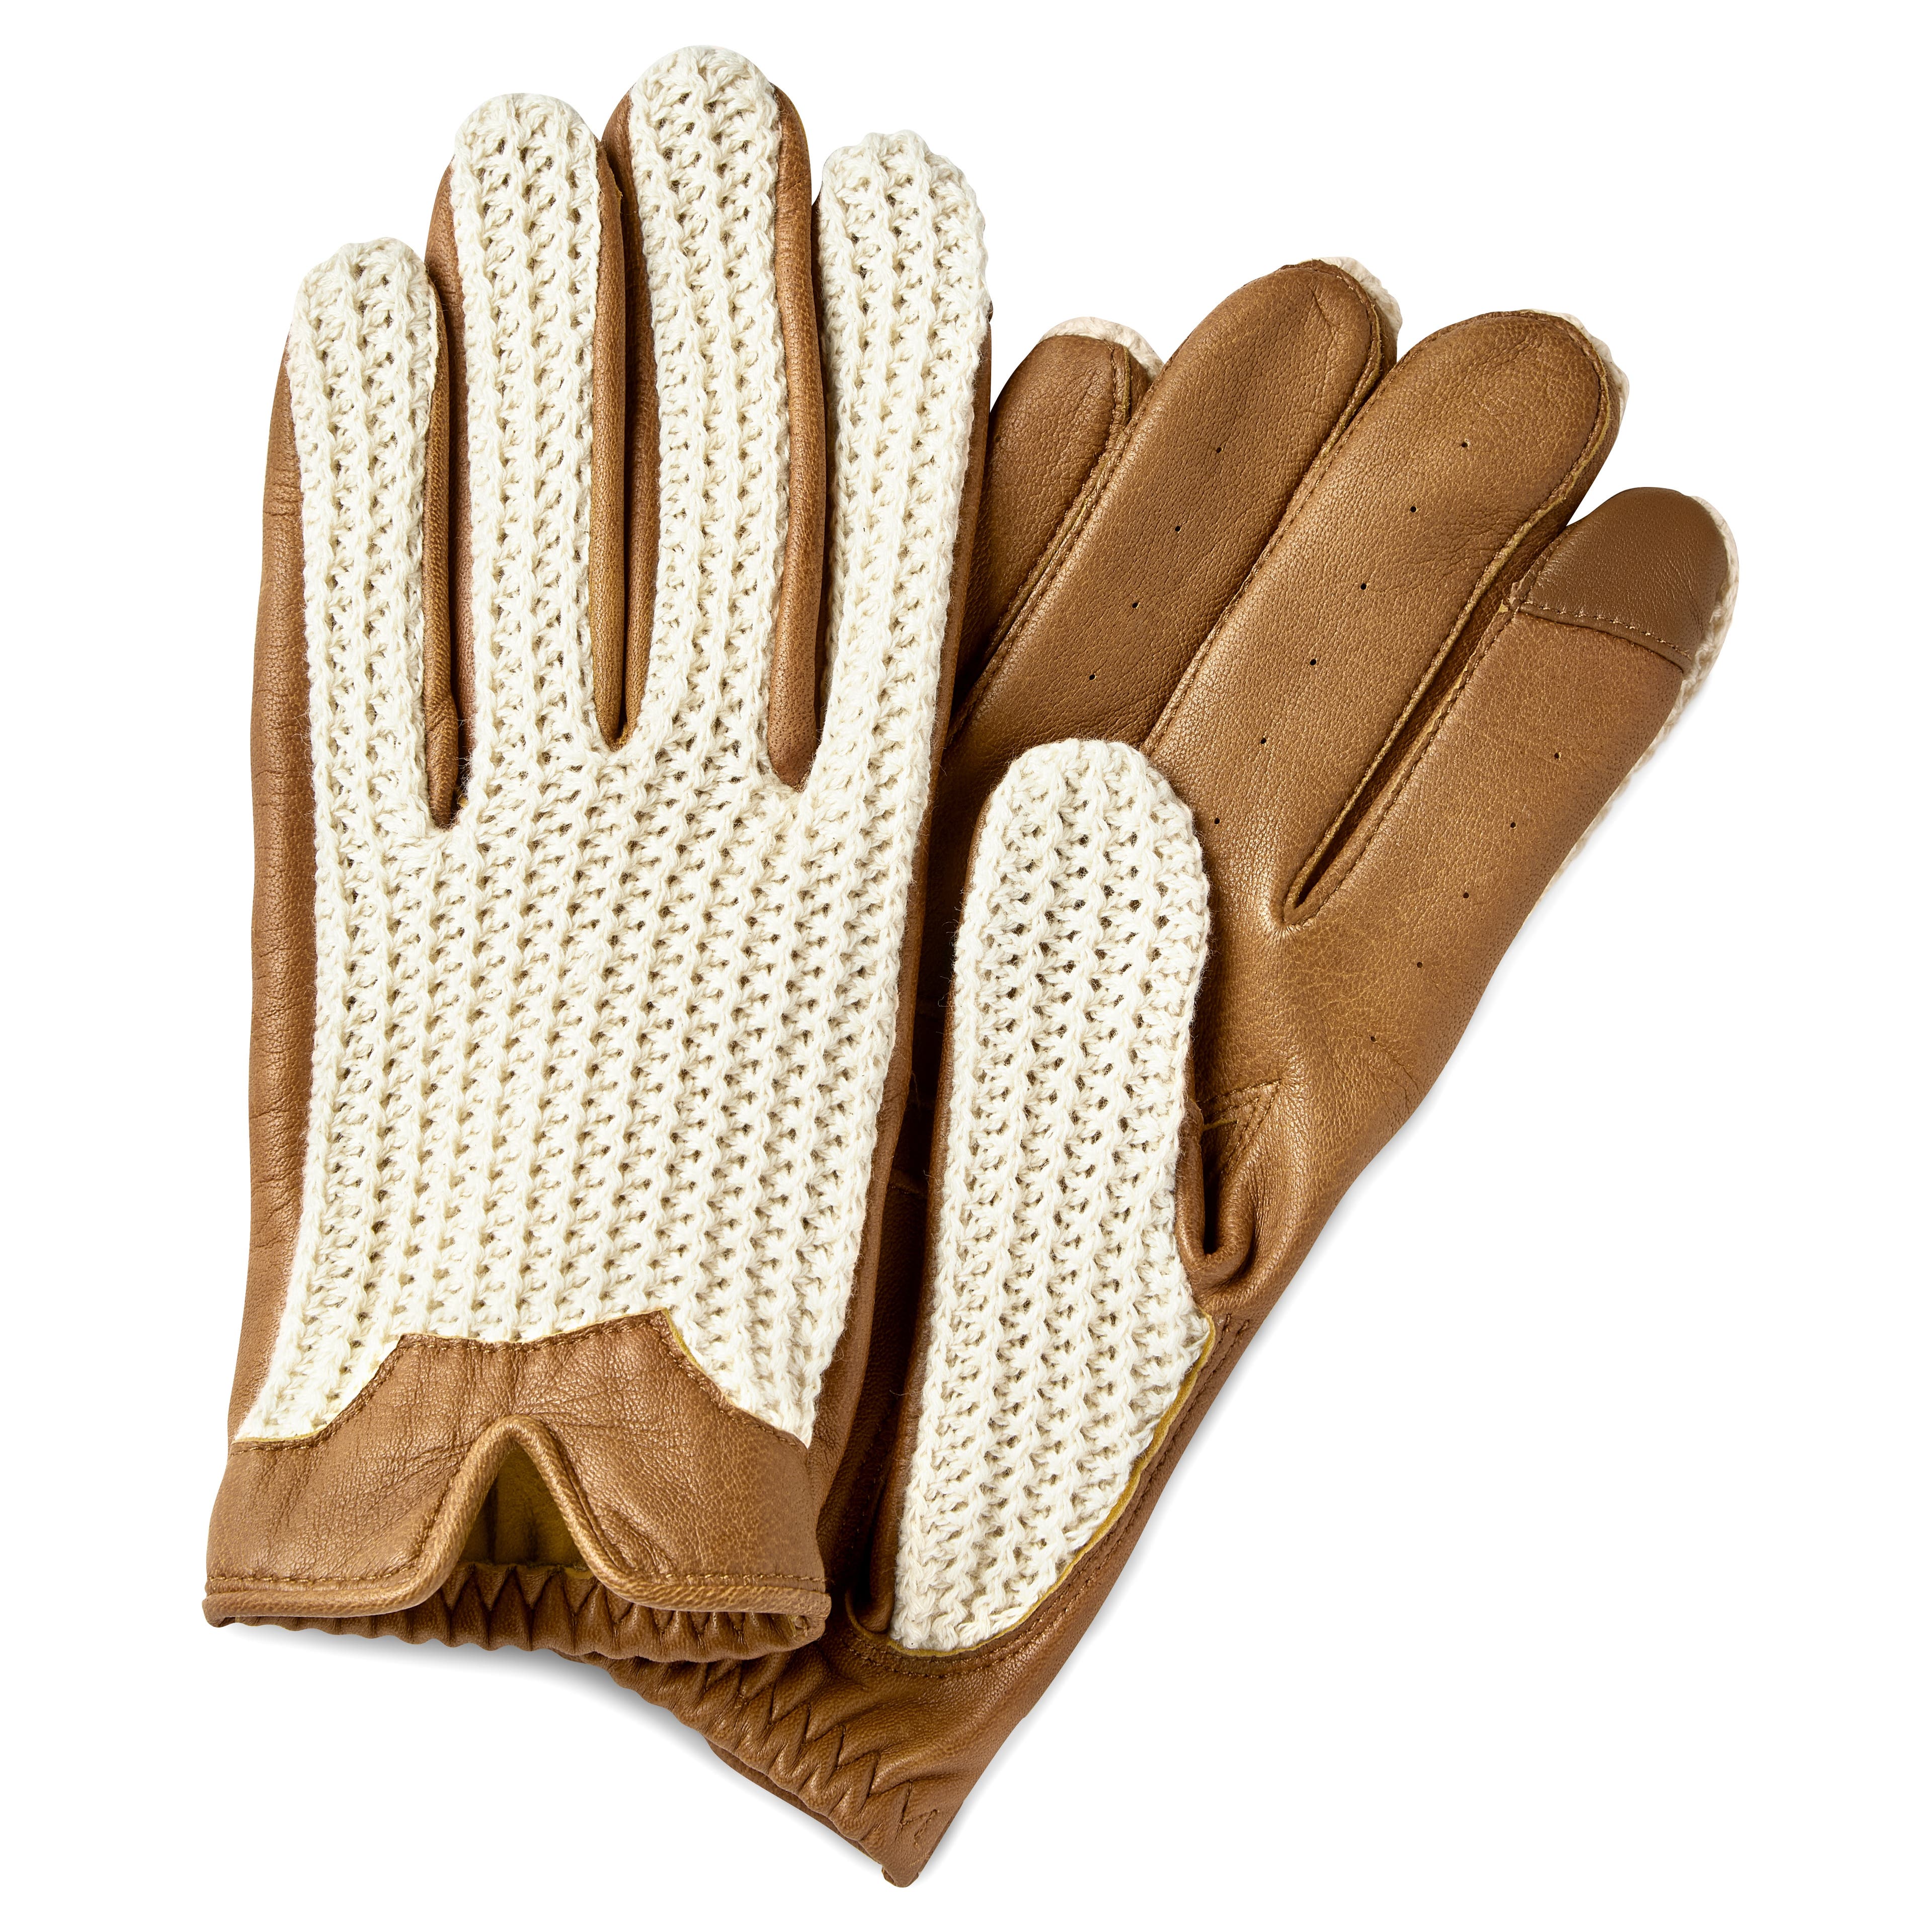 Tan & Ivory Sheepskin Leather Touchscreen Driving Gloves